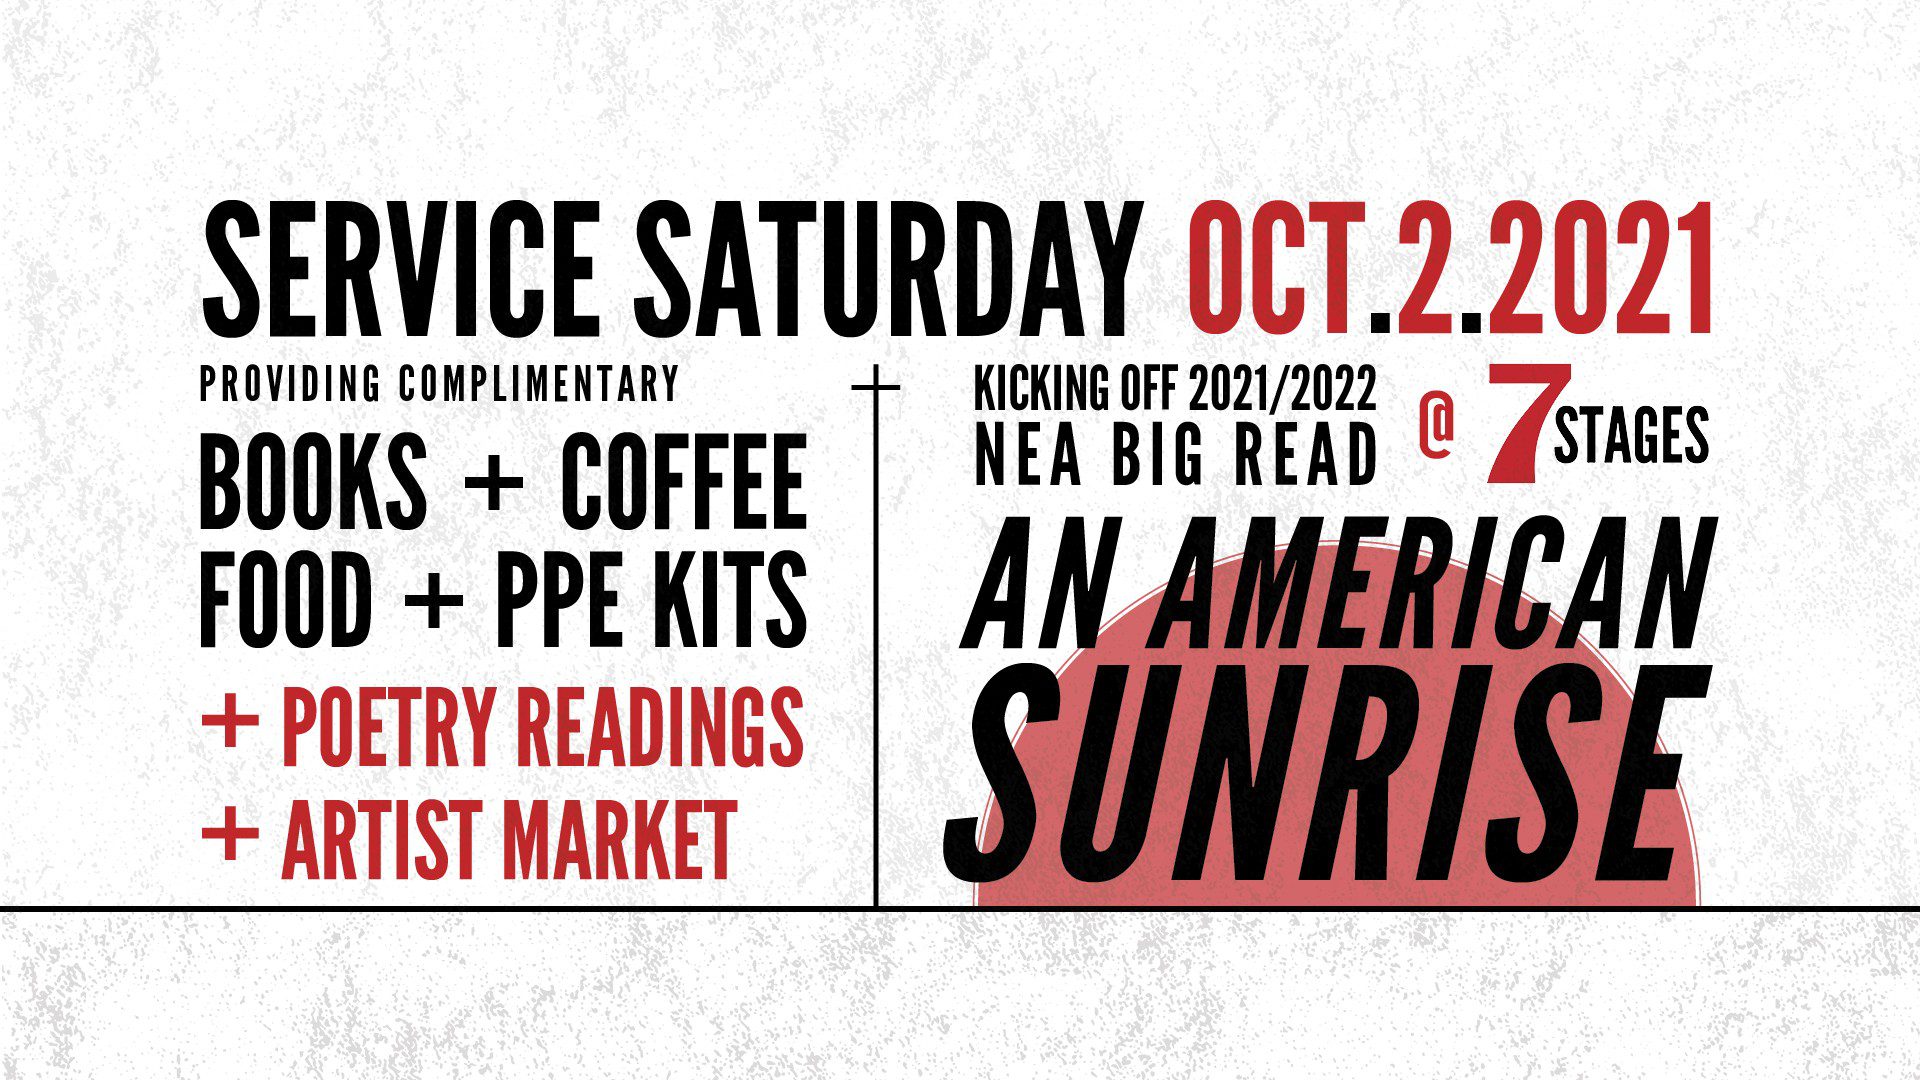 Service Saturday October 2, 2021. Providing Complimentary Books, Coffee, Food and PPE, plus Poetry Readings and Artist Market. Kicking off 2021/2022 NEA Big Read at 7 Stages with An American Sunrise.